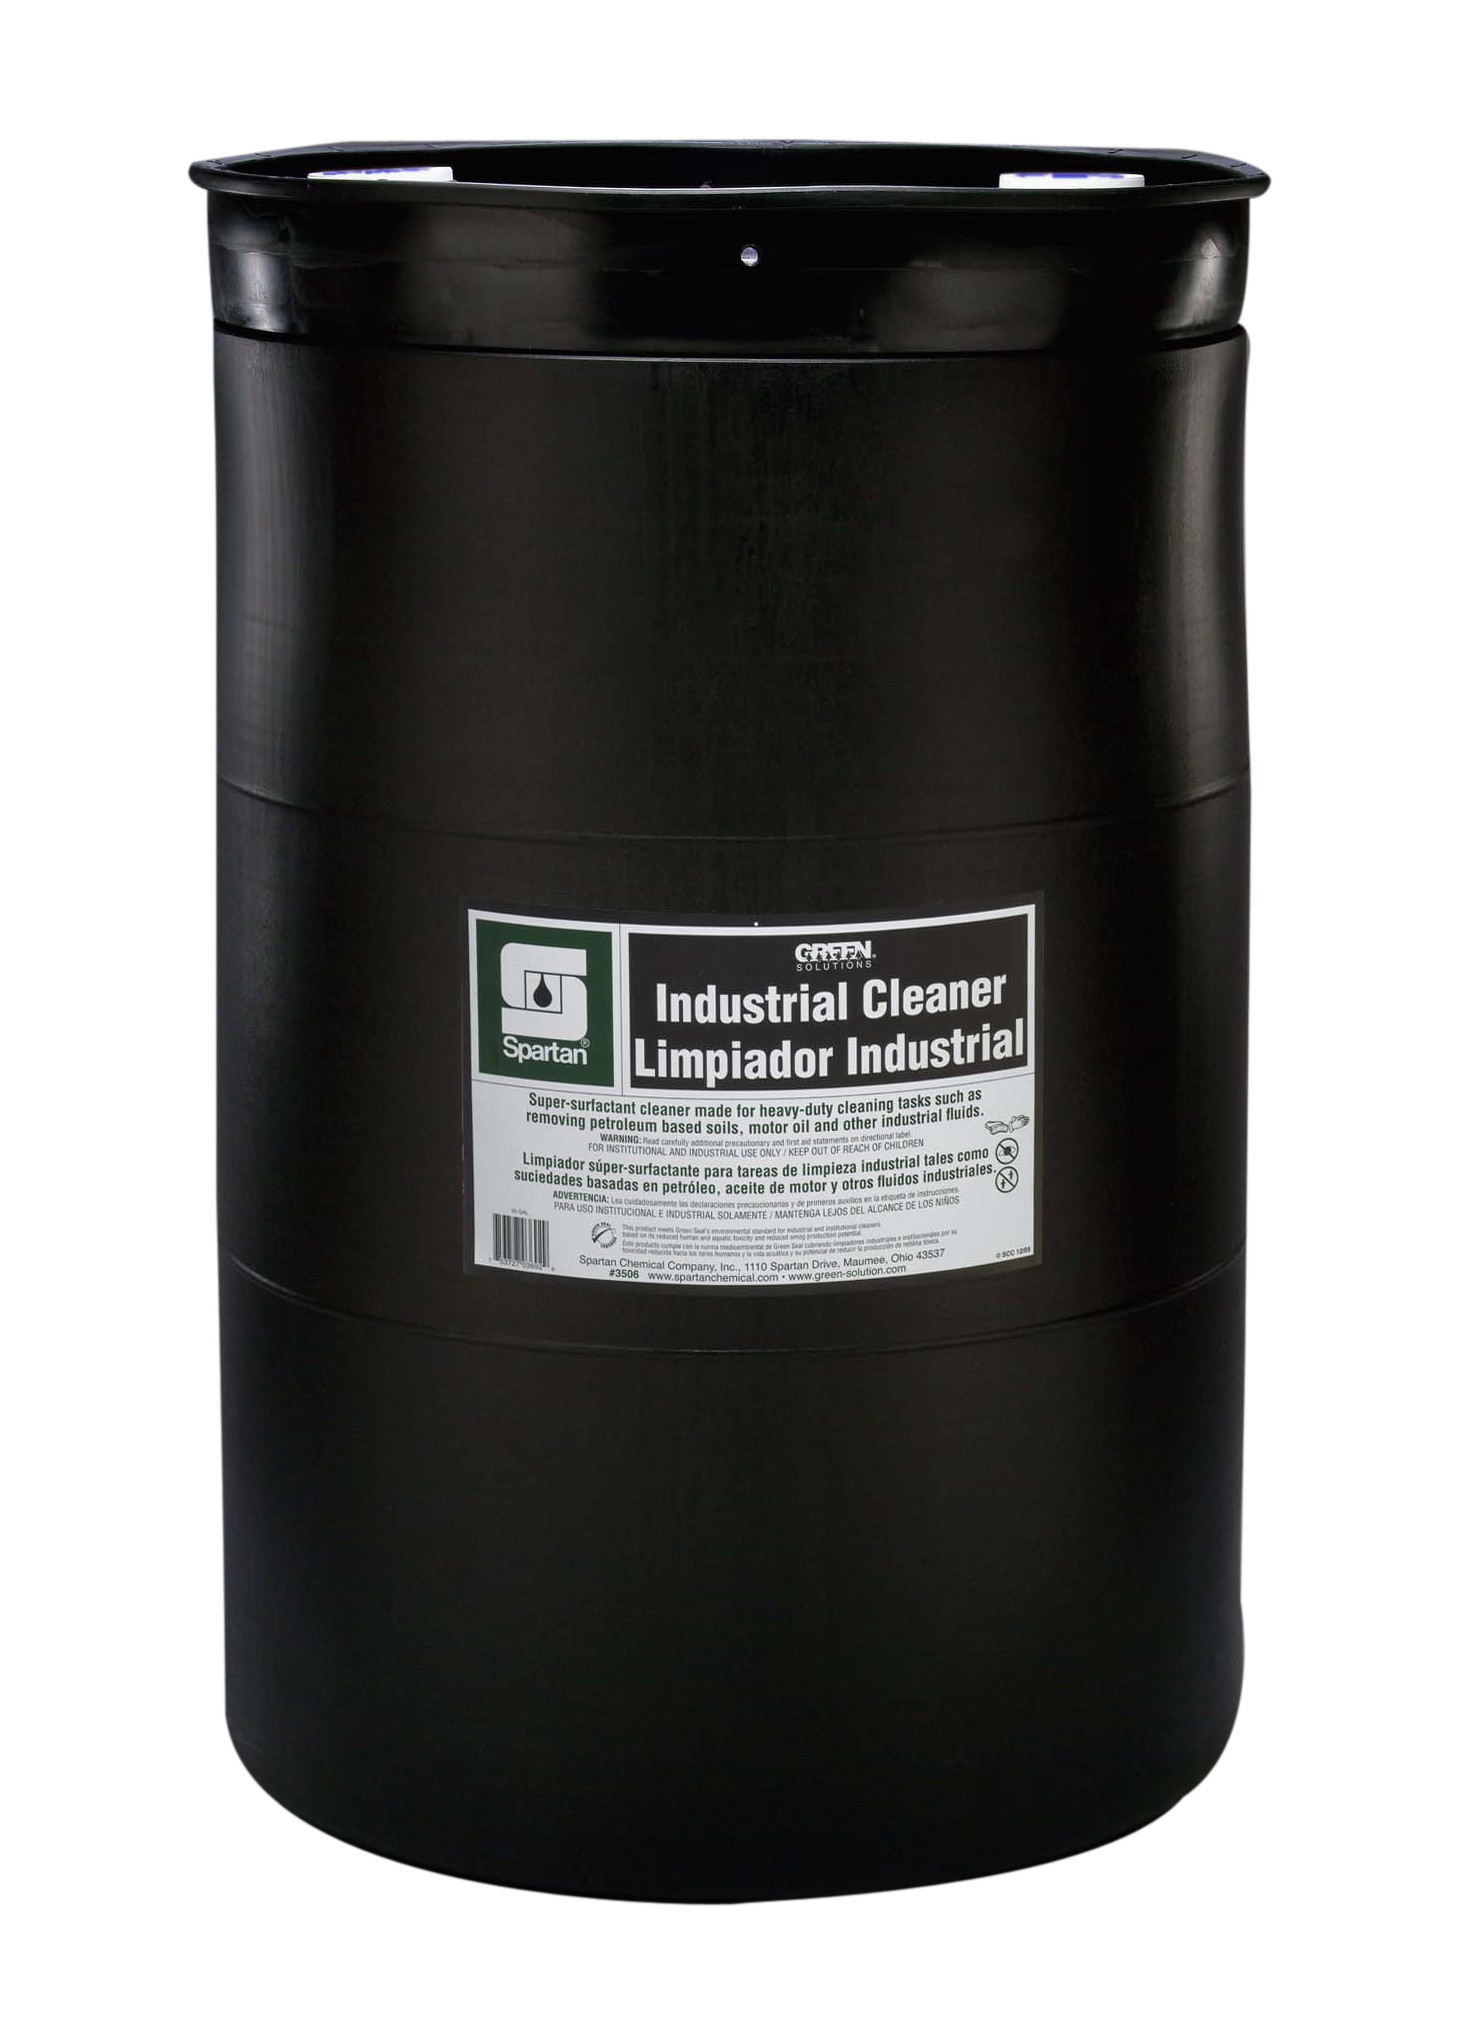 Spartan Chemical Company Green Solutions Industrial Cleaner, 55 GAL DRUM